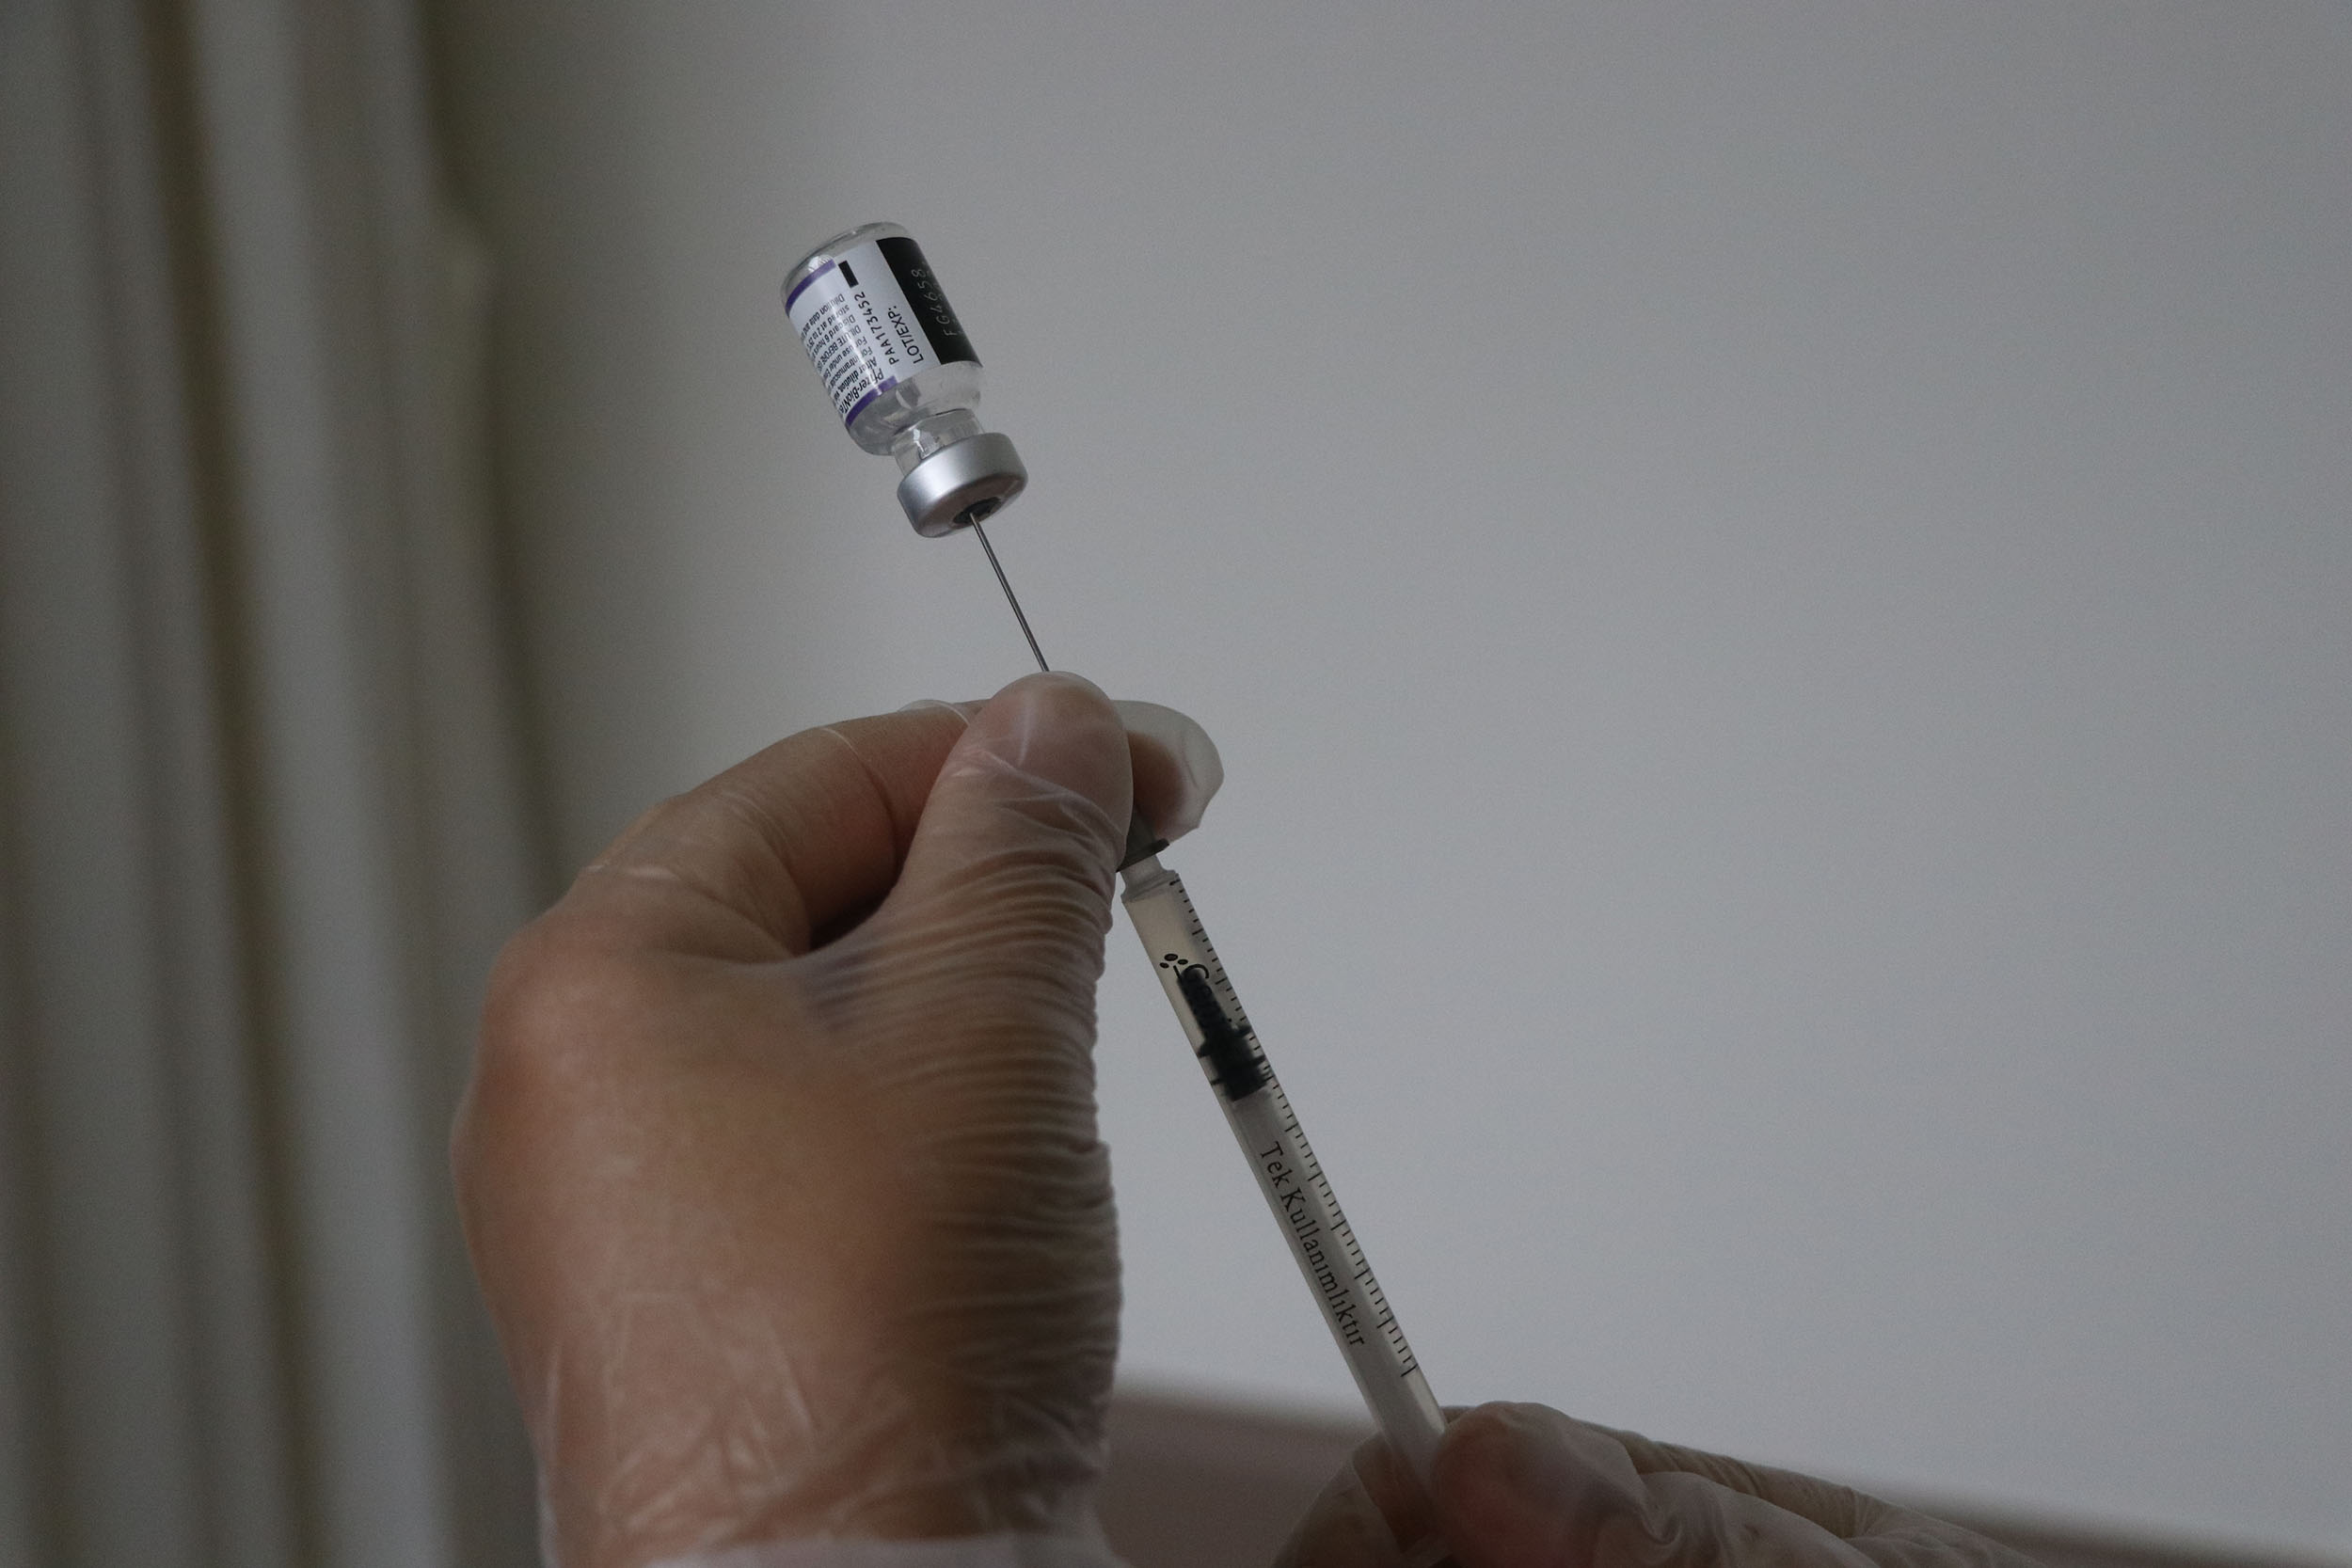 Turkey has administered more than 120.8 million doses of COVID-19 vaccines